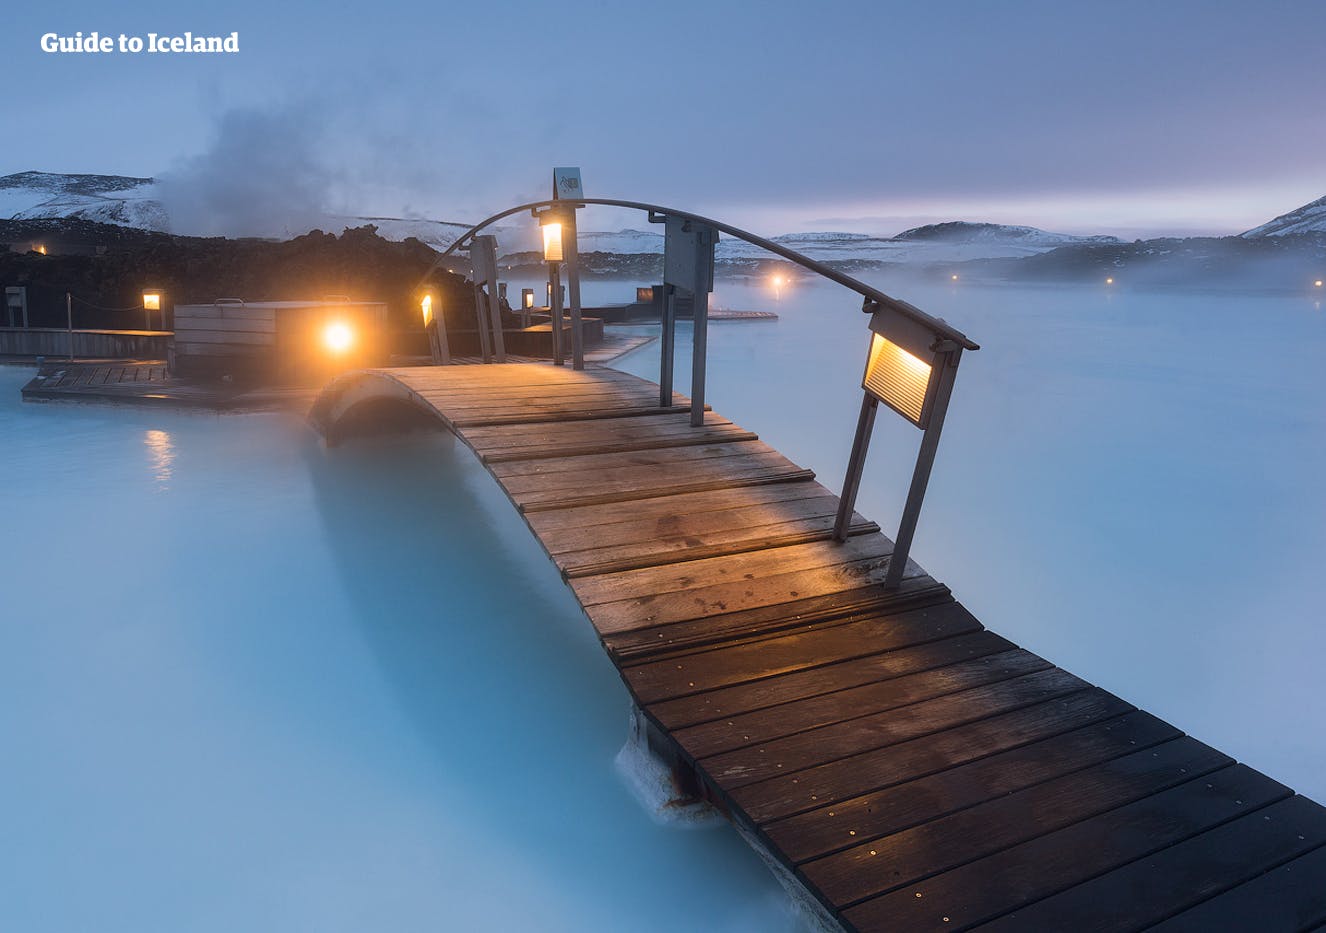 The warm water in the Blue Lagoon is reputed for having healing powers.